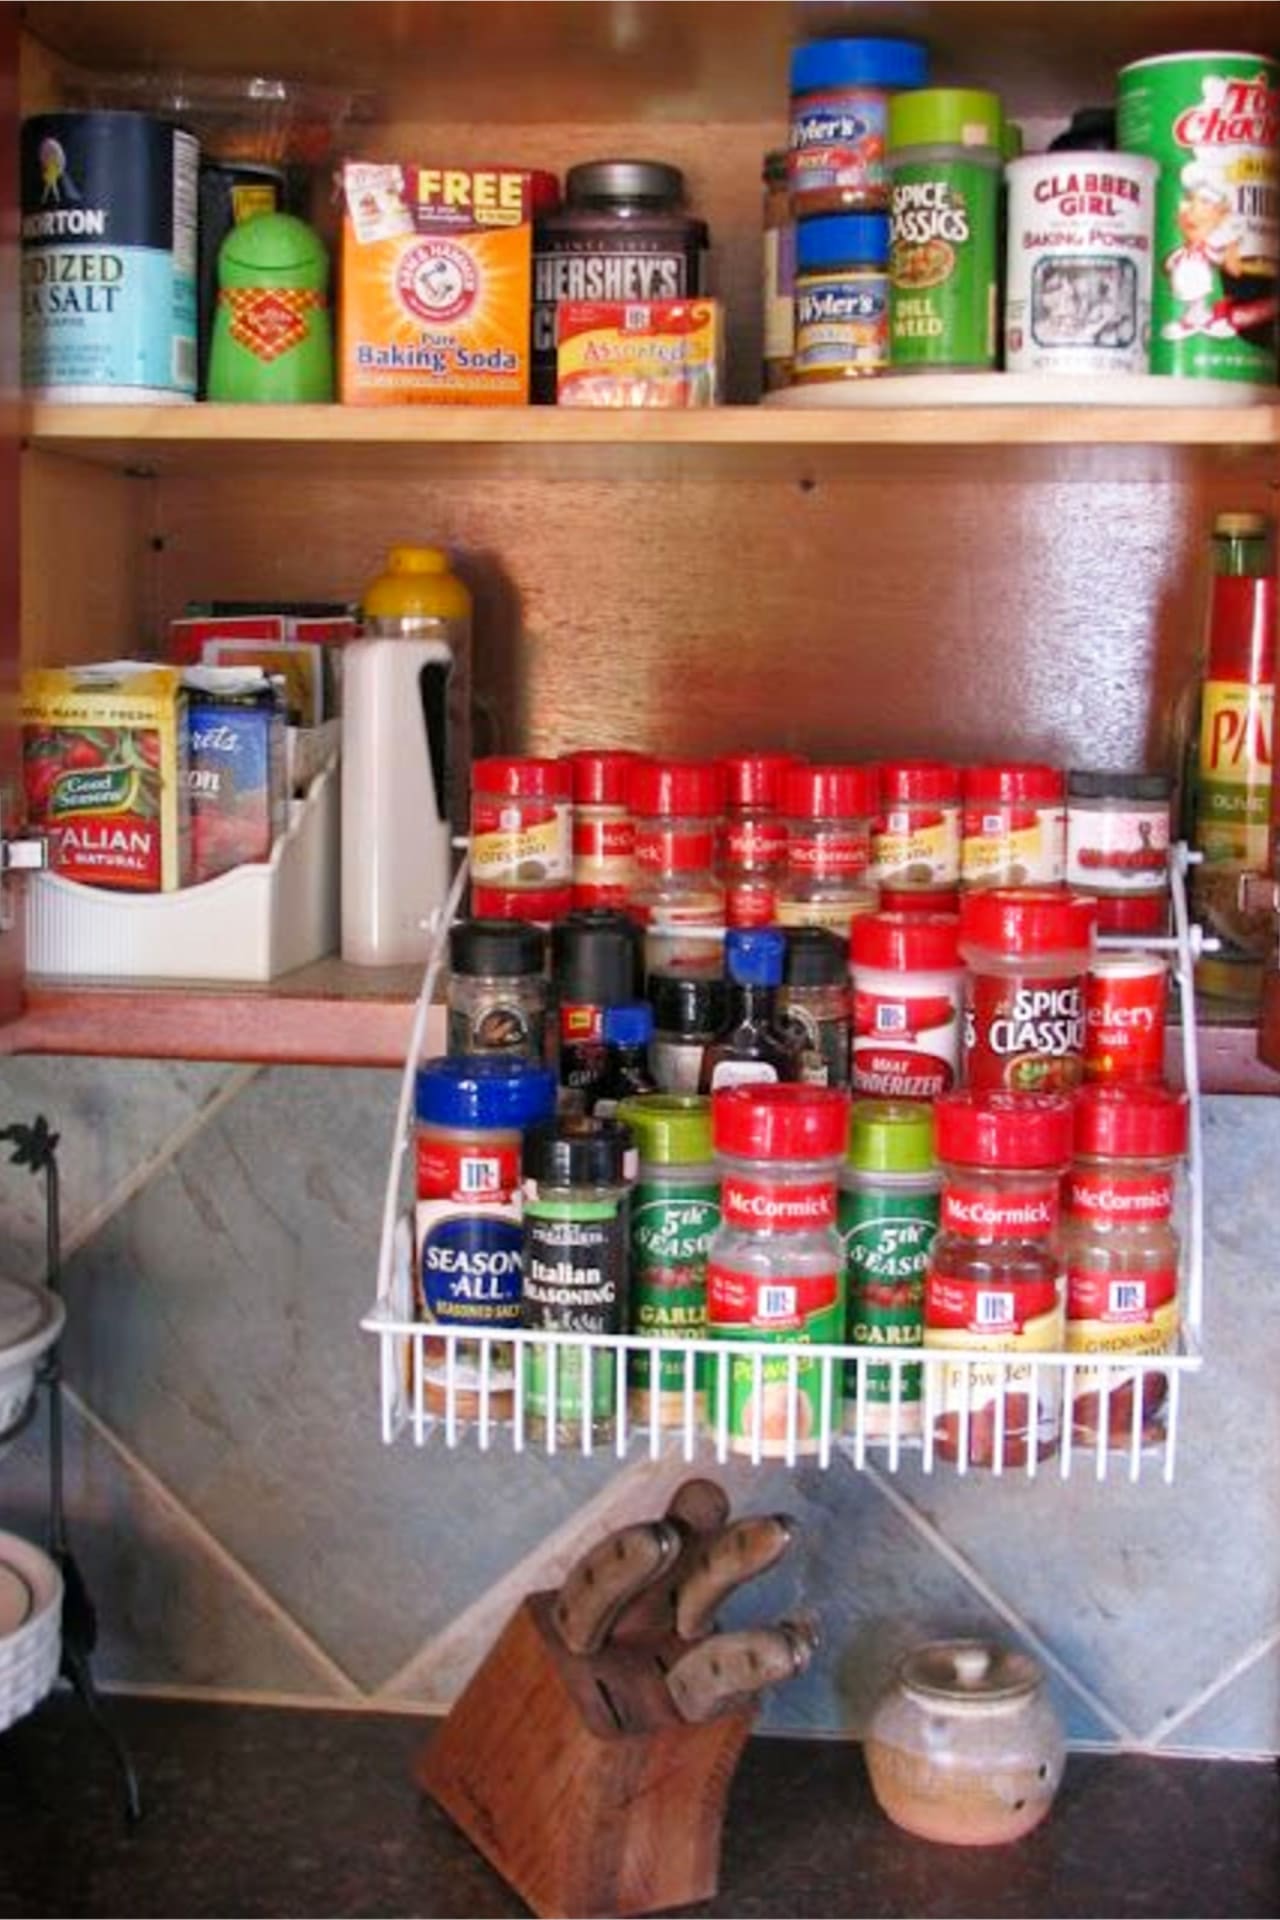 Kitchen clutter solutions - spice cabinet organization ideas to organize your kitchen on a budget